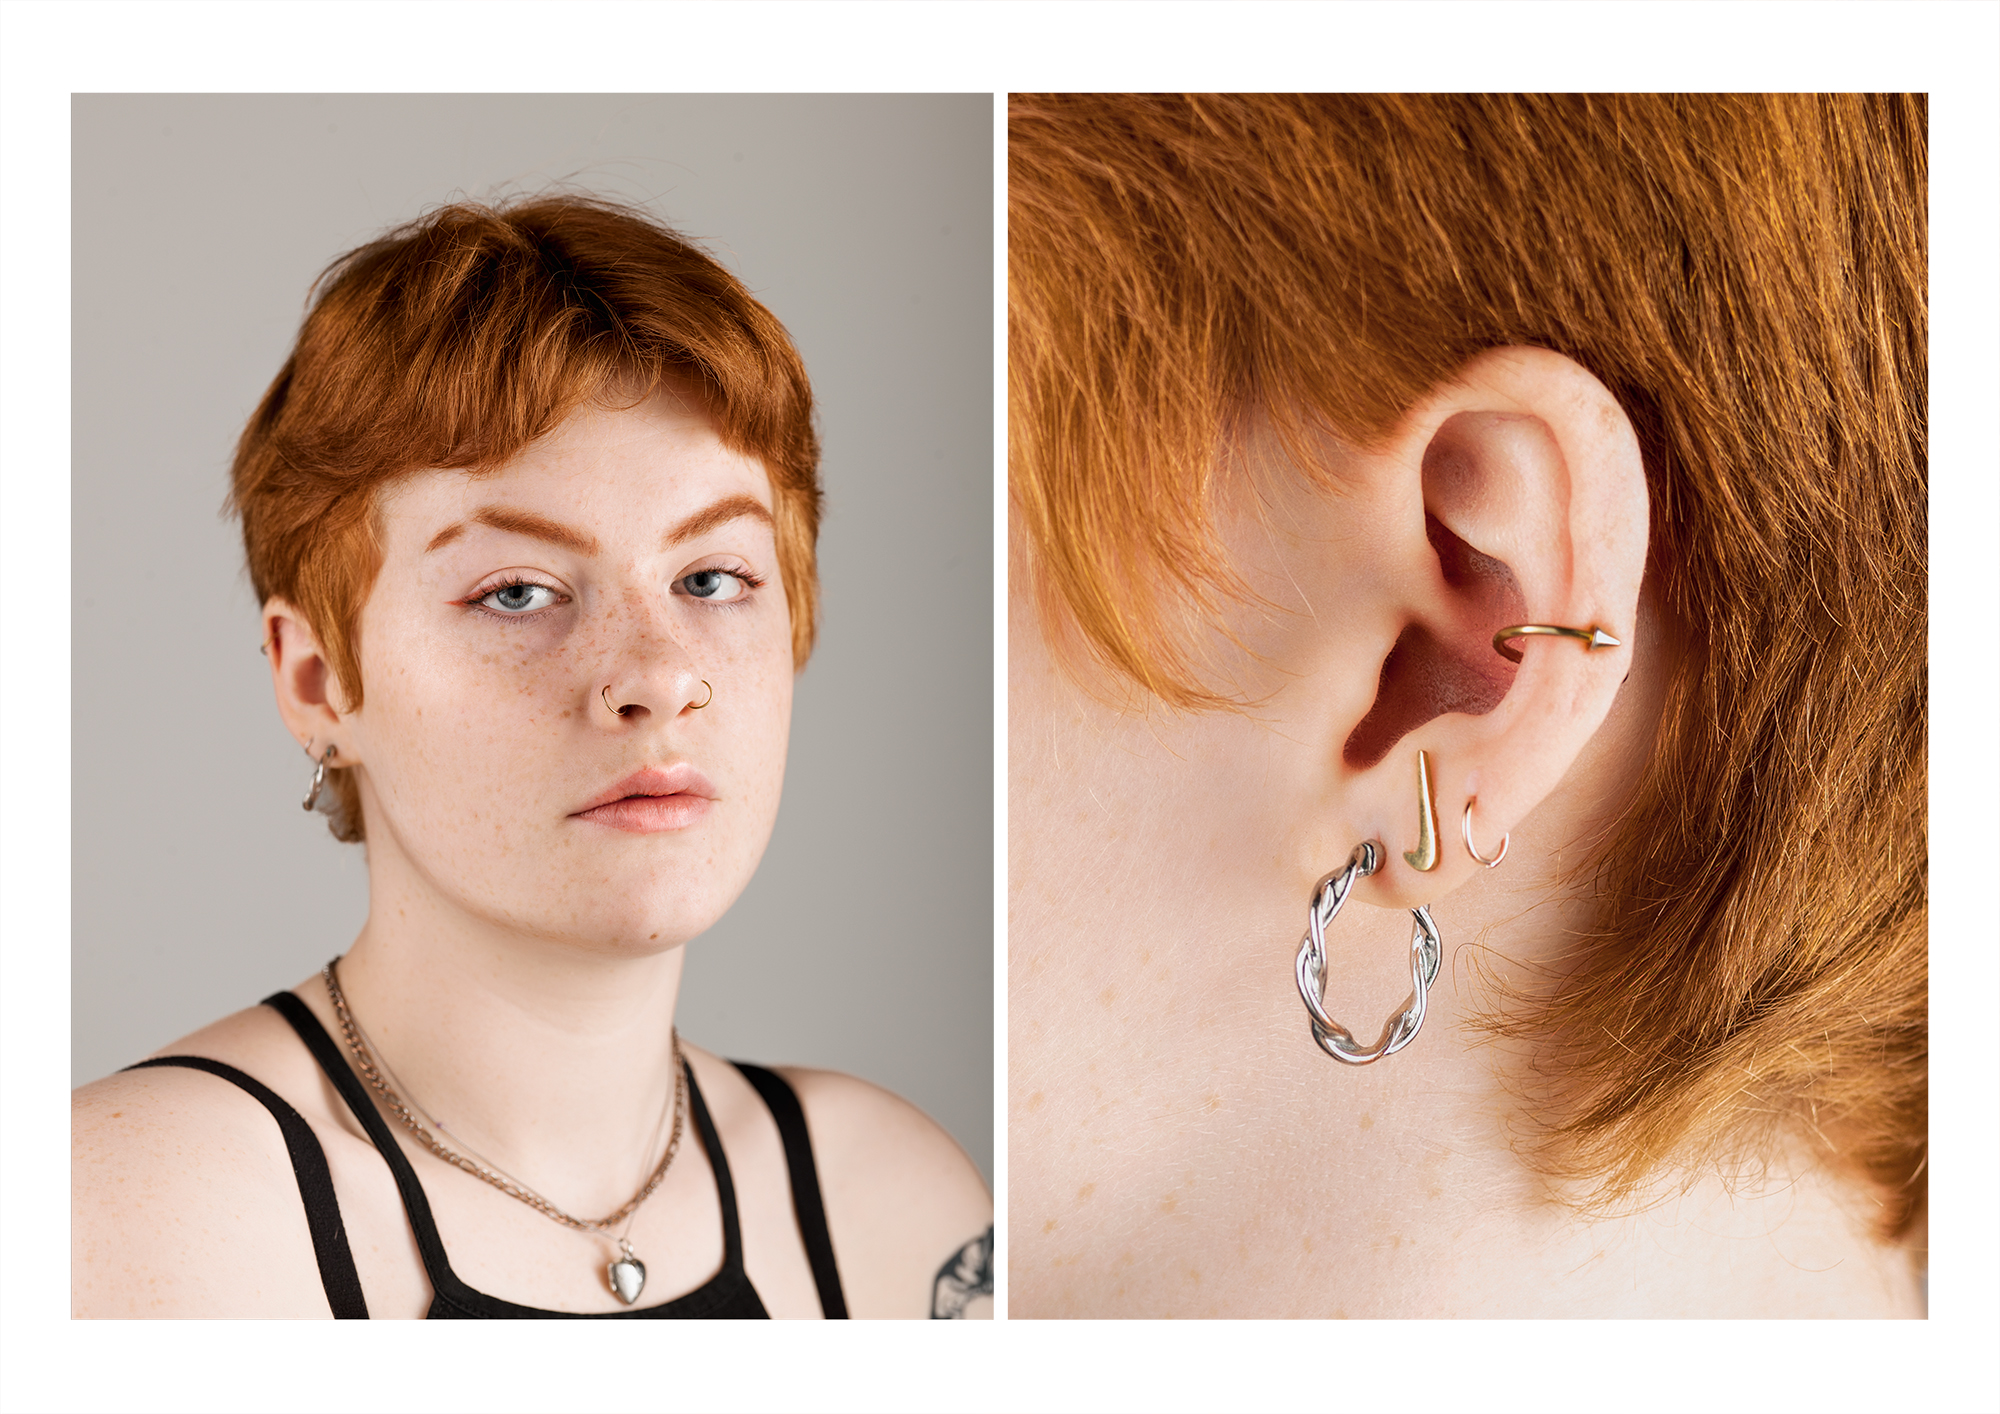 2 images side-by-side of short, ginger haired model wearing earrings and light makeup.